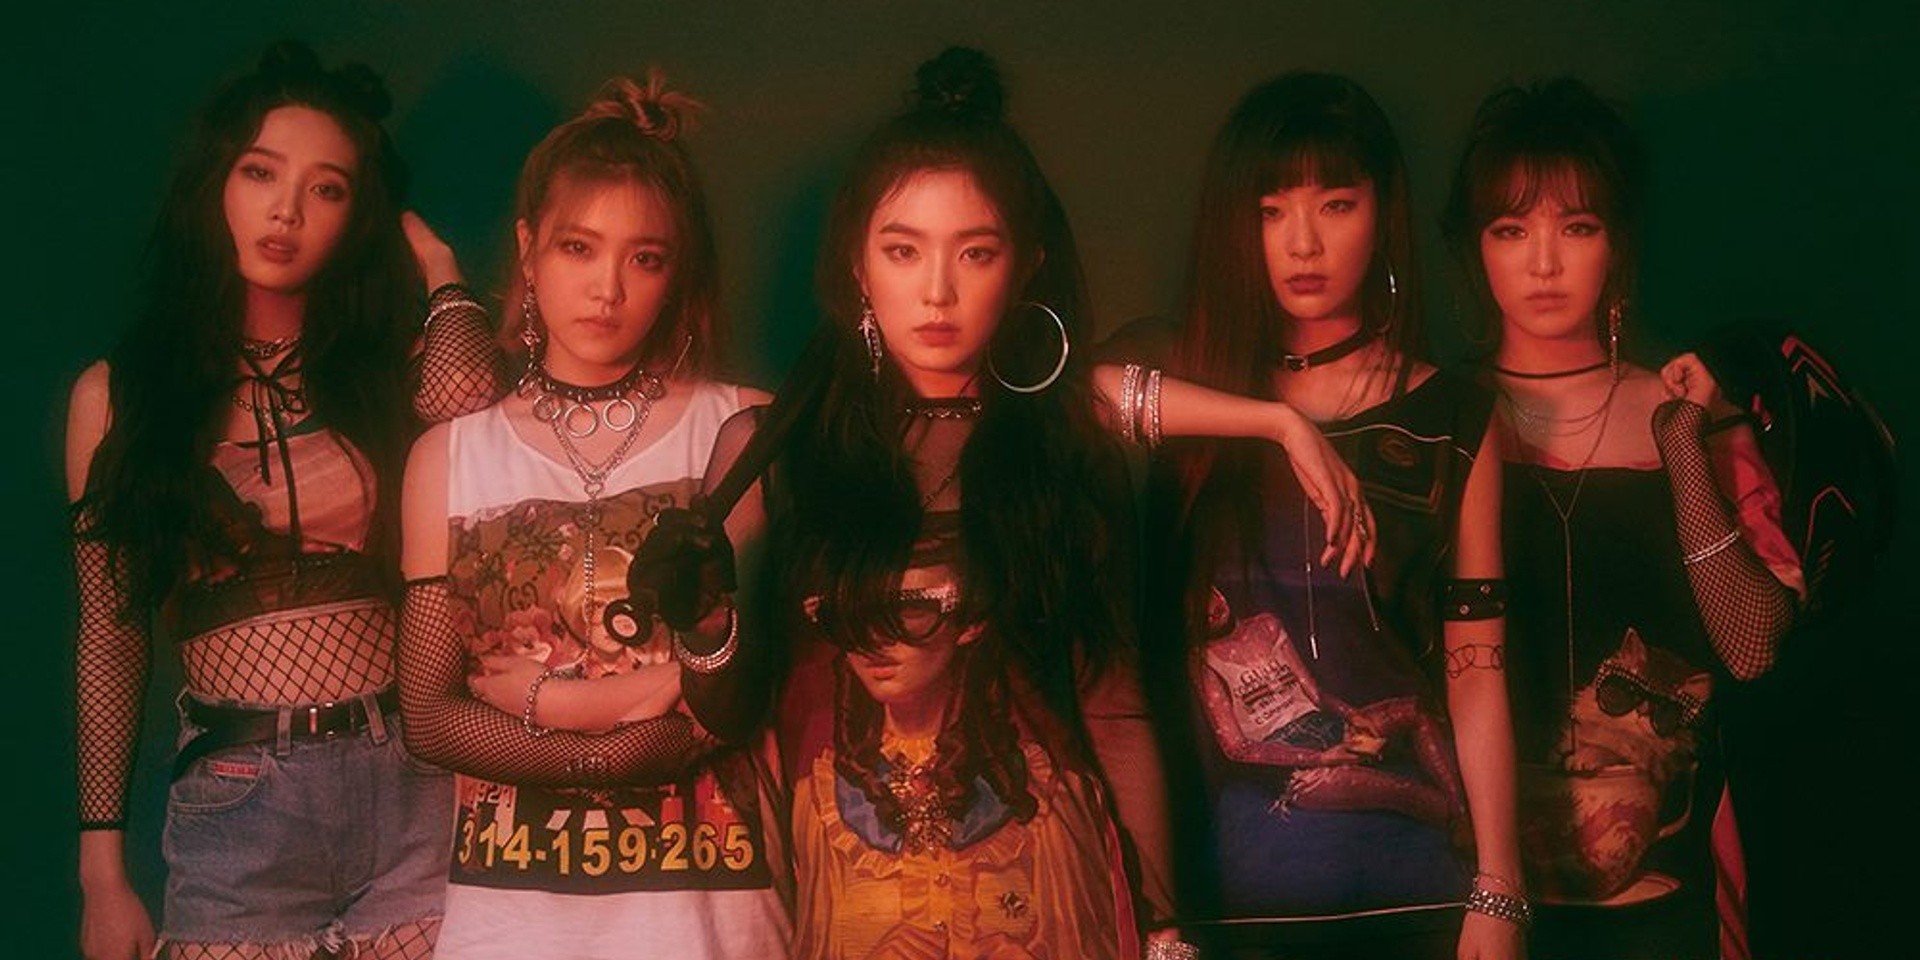 Red Velvet unveil remixes of 'Bad Boy' featuring PREP, nomad, and Slom — listen